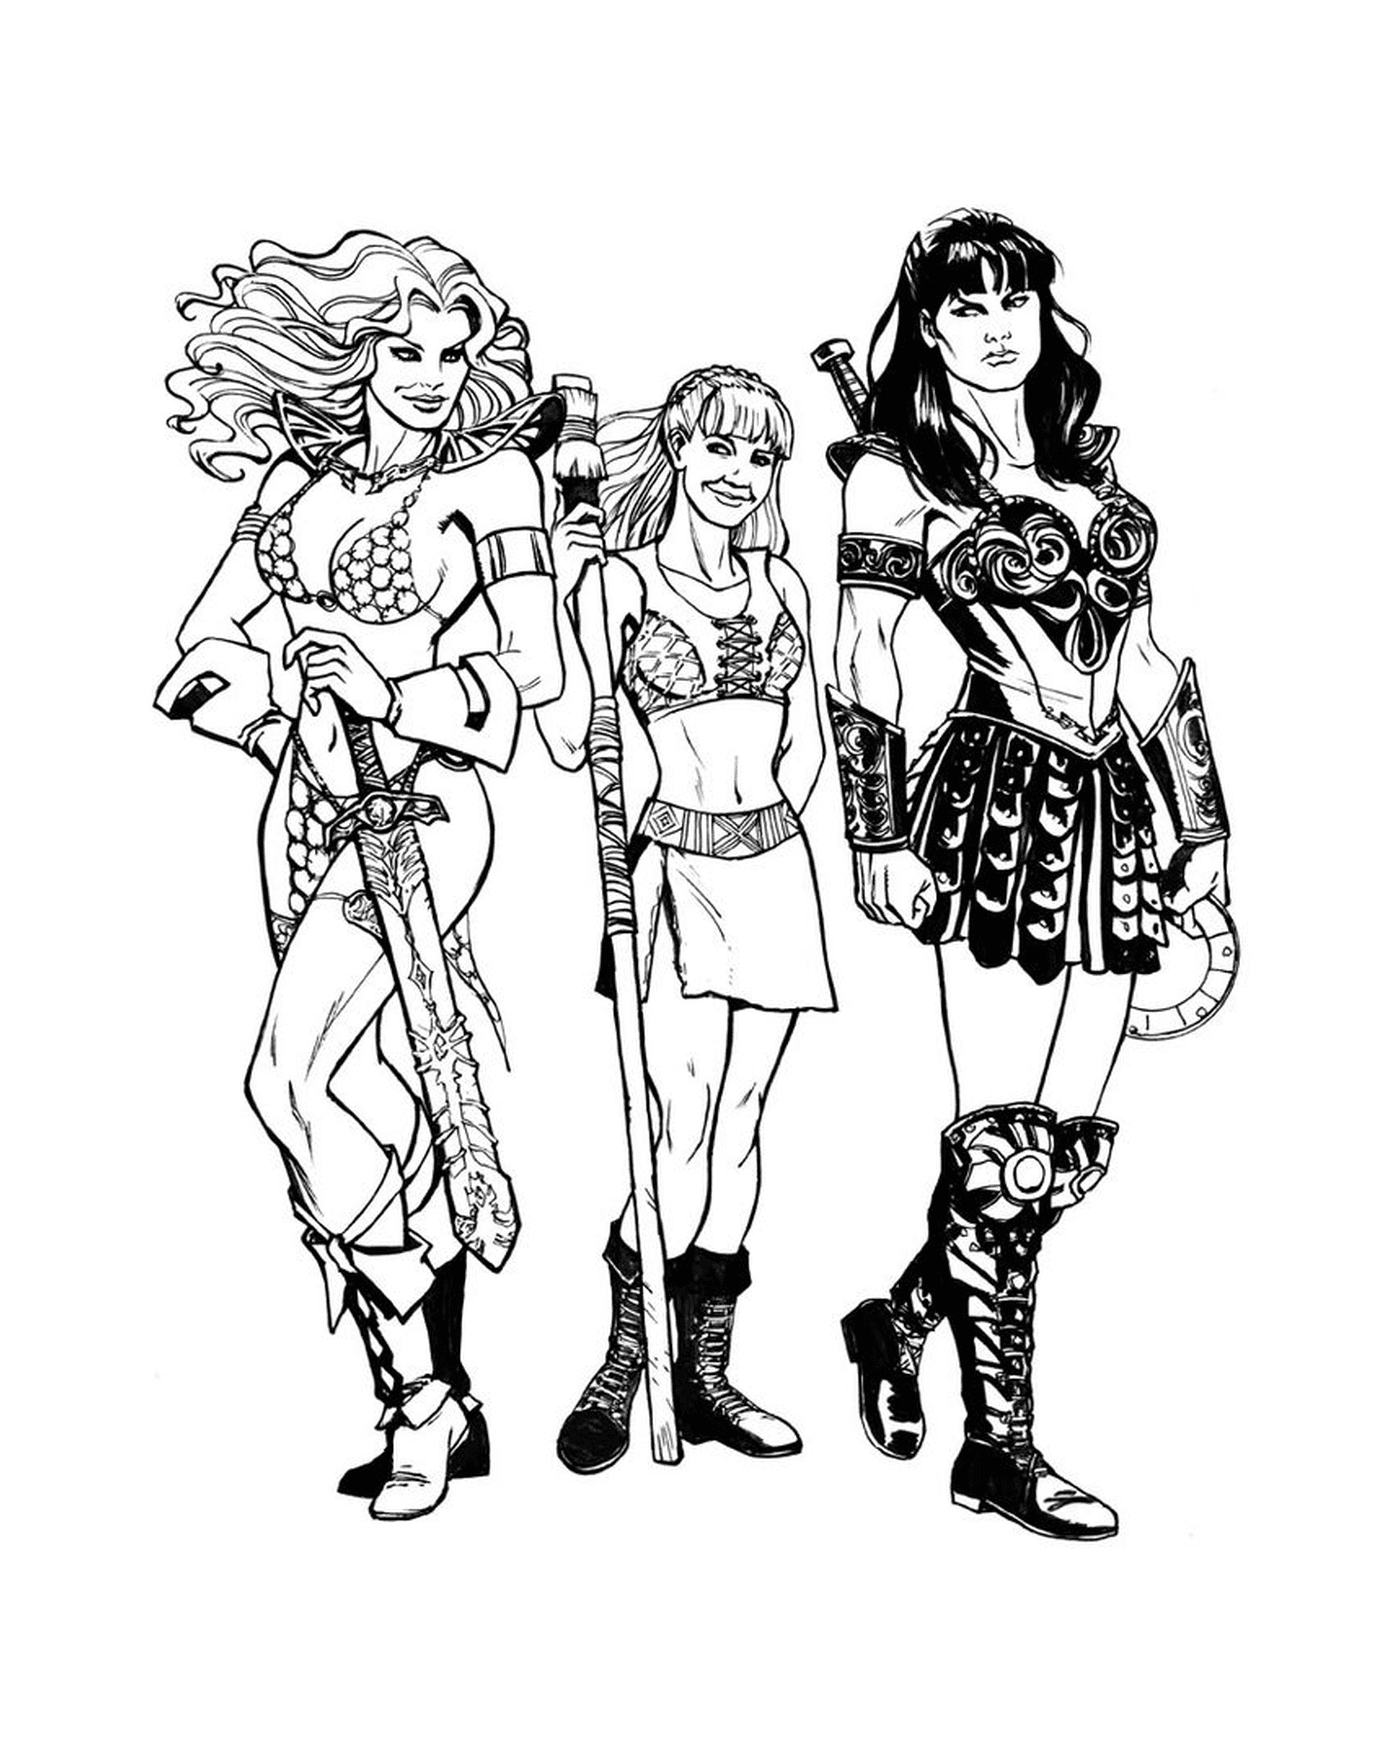  Xena, Gabrielle and Red Sonja 